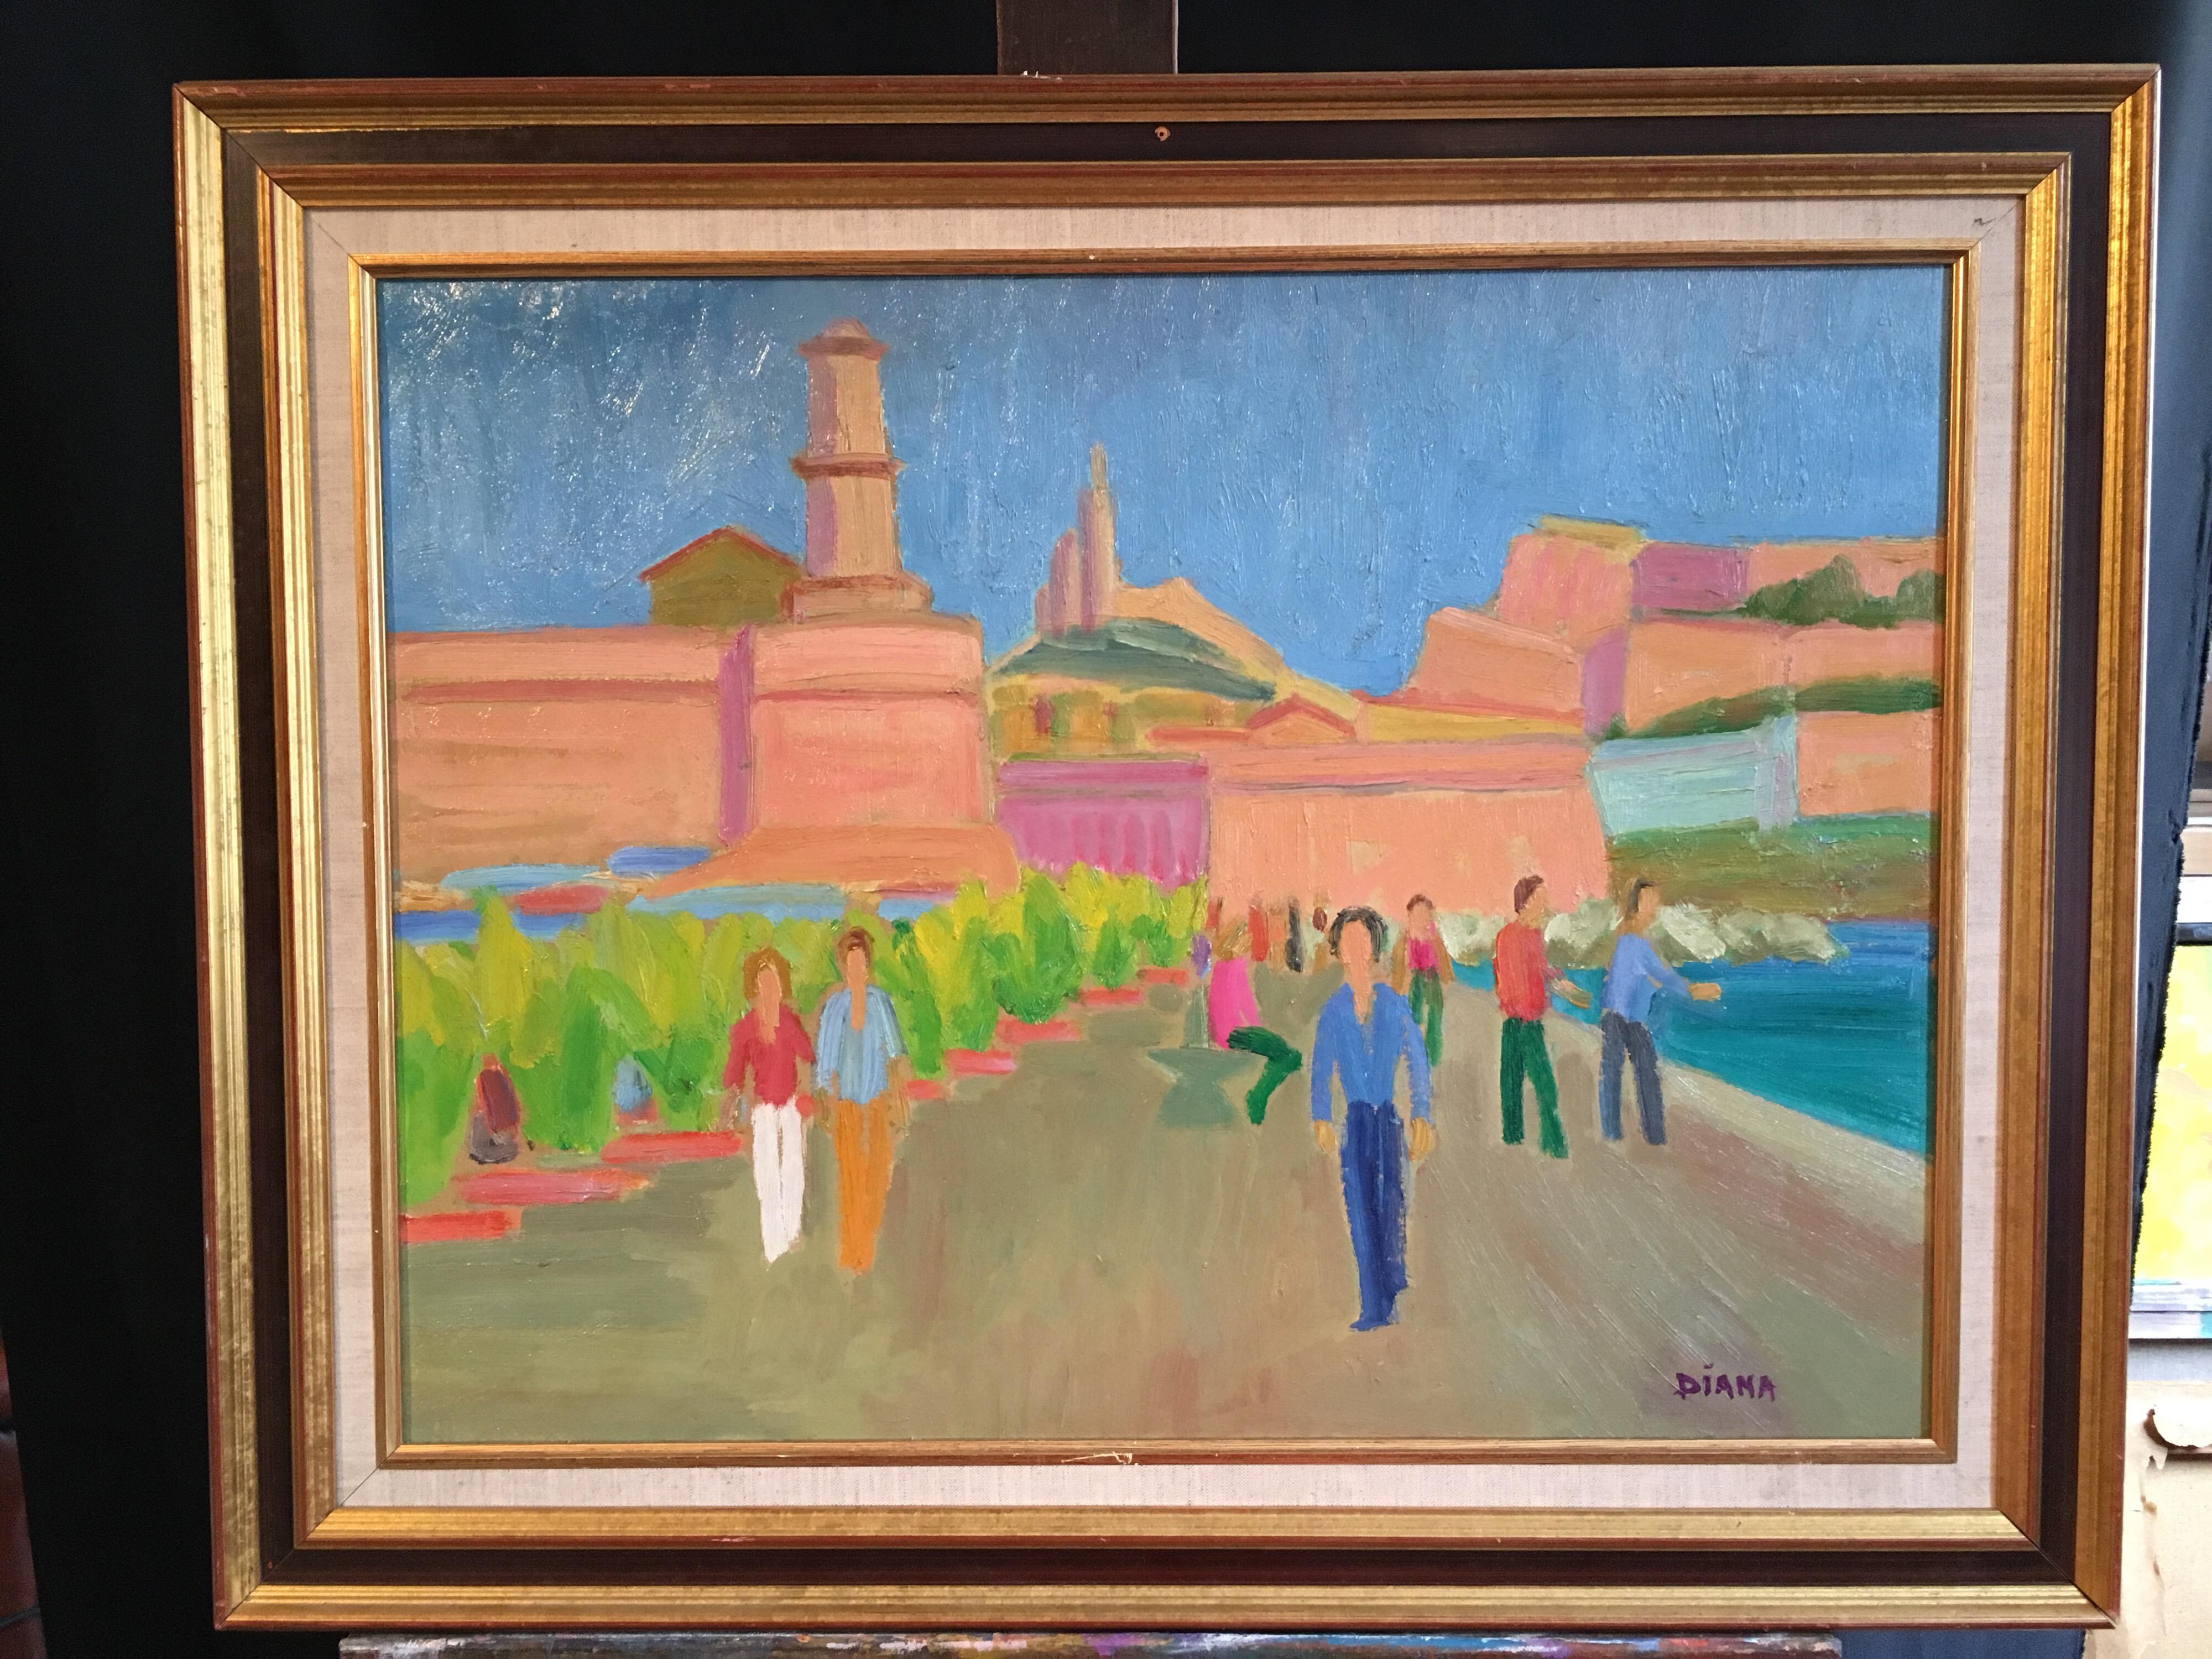 Impressionist Scene of a Cityscape, Signed Oil Painting
French School, signed 'Diana', 20th century
Signed by the artist on the lower right hand corner
Oil painting on board, framed
Framed size: 25 x 31 inches

Striking scene of a city landscape.